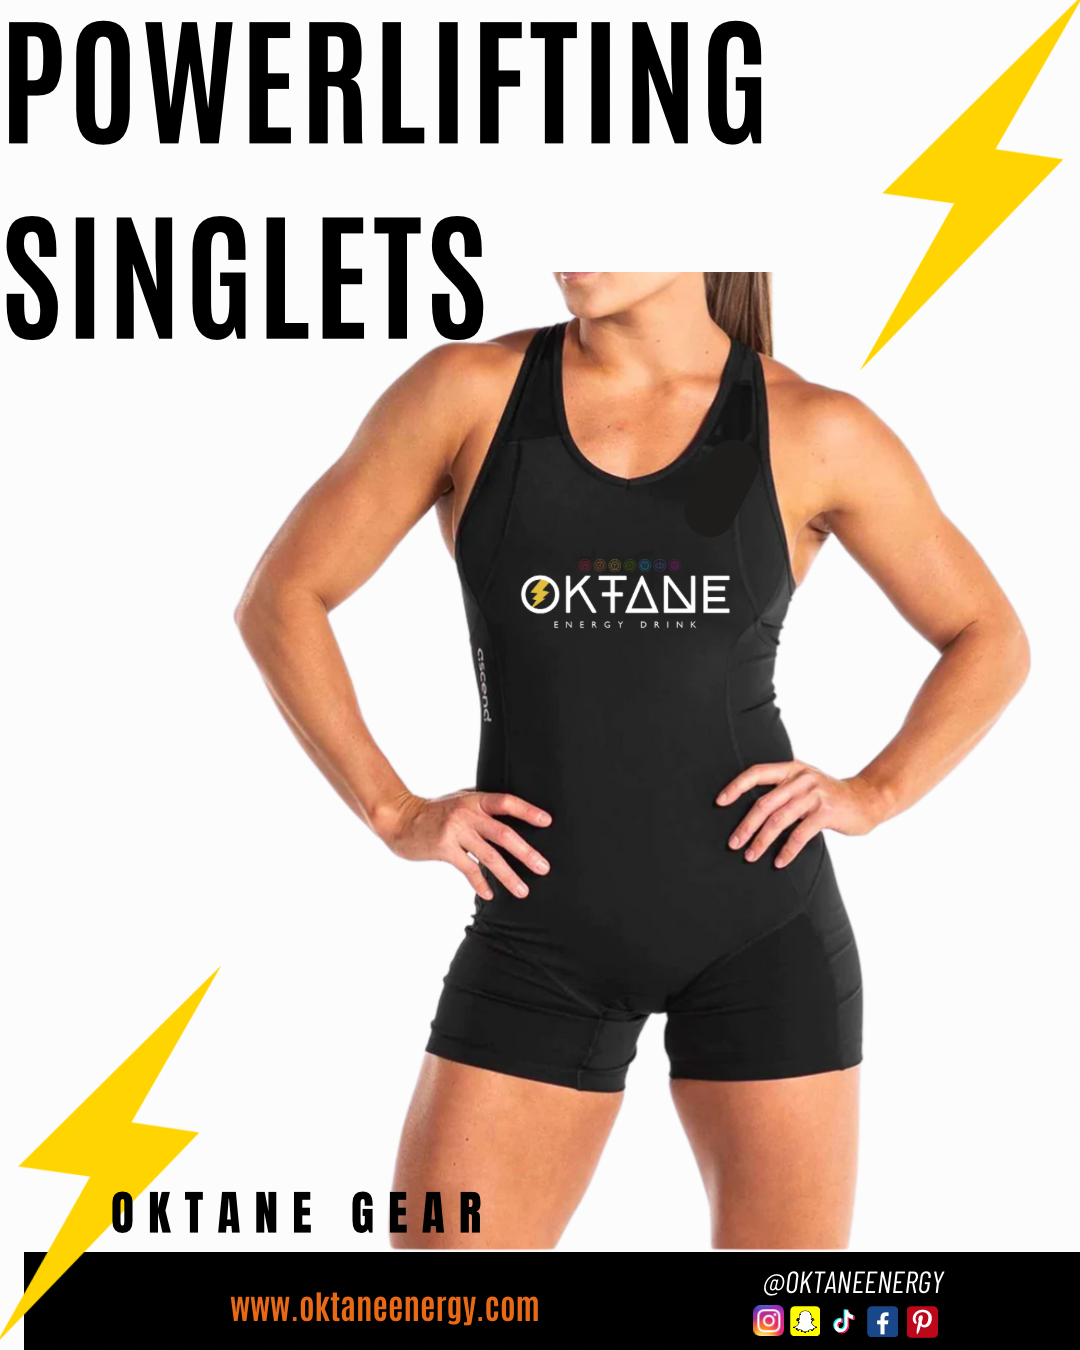 NEW- Women’s Oktane Weightlifting and Powerlifting Singlets